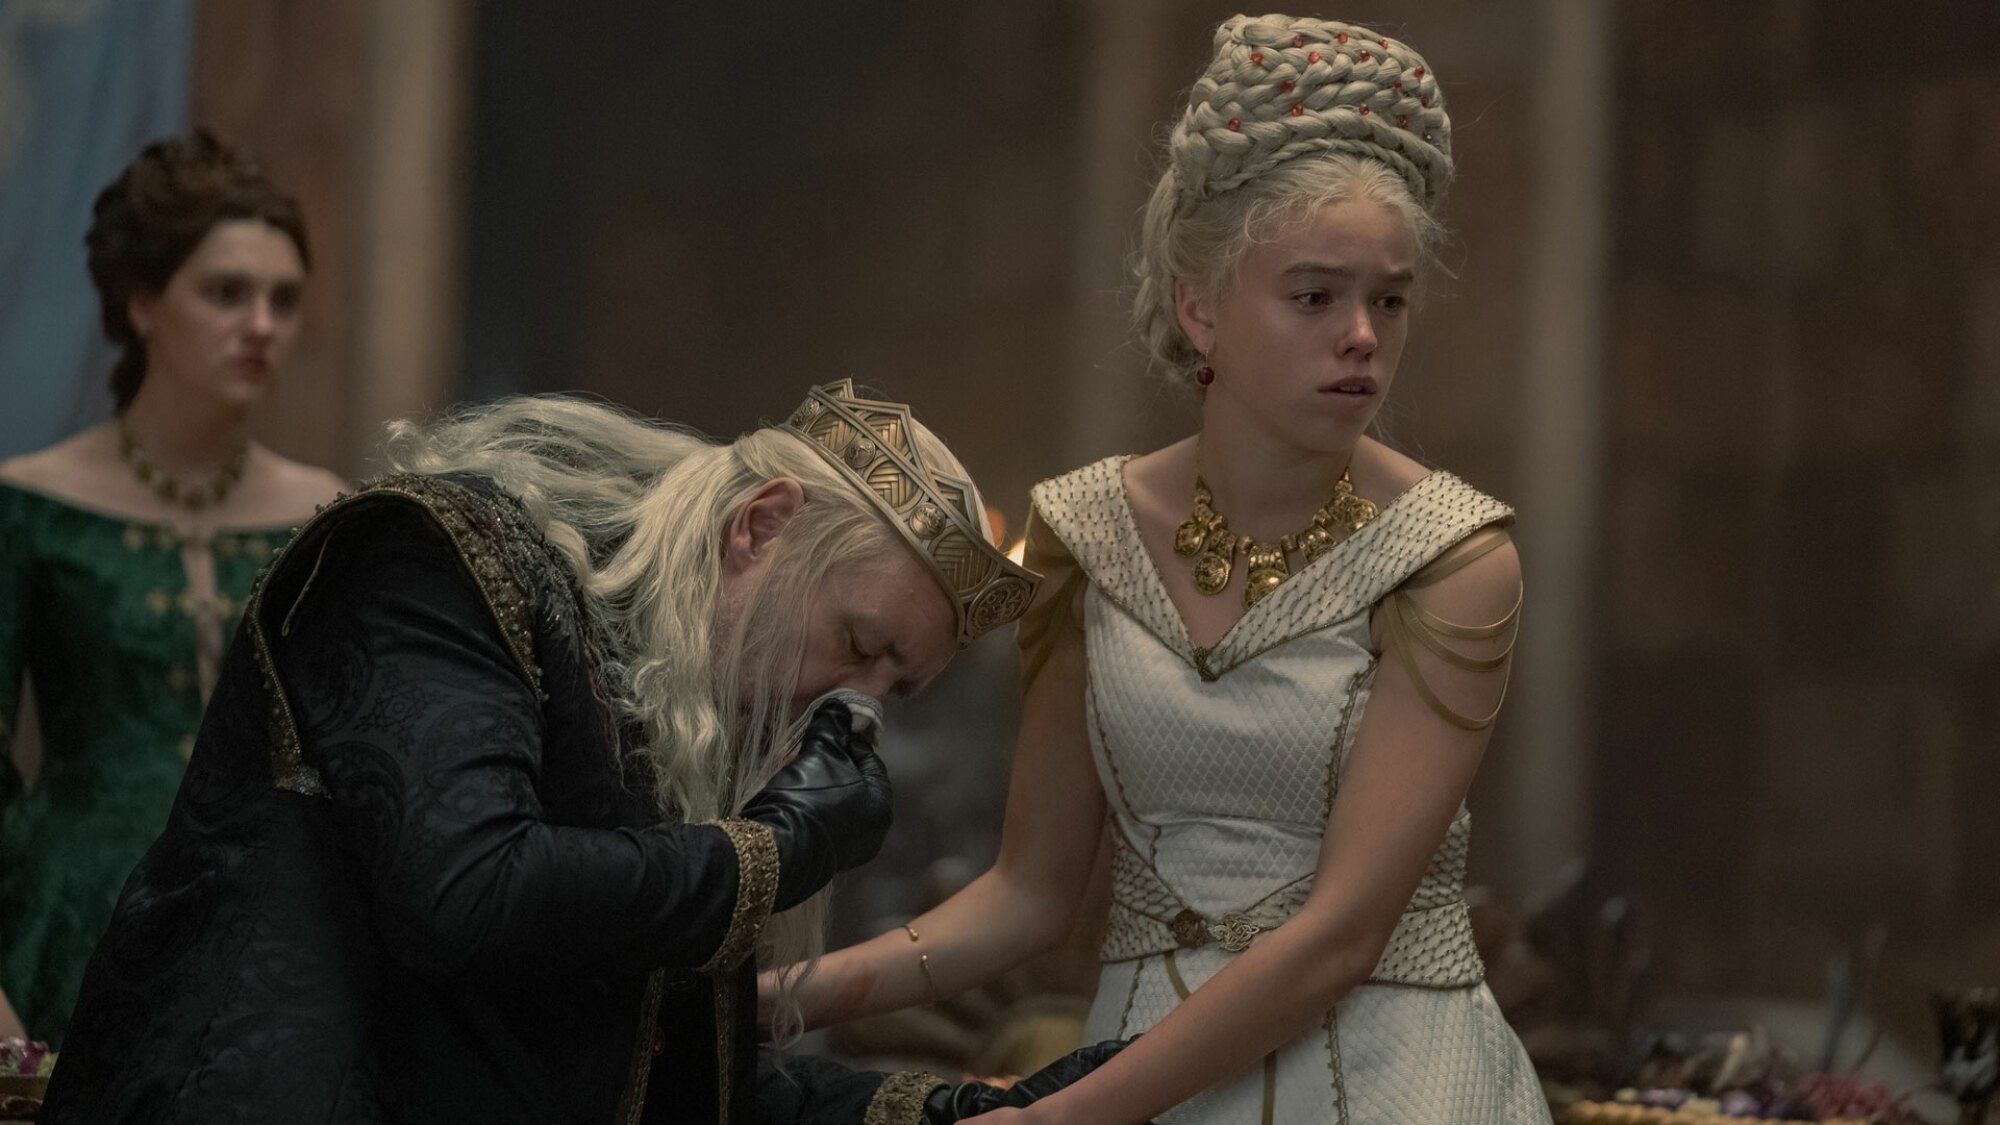 A king coughs into a handkerchief while a blonde woman holds onto him.